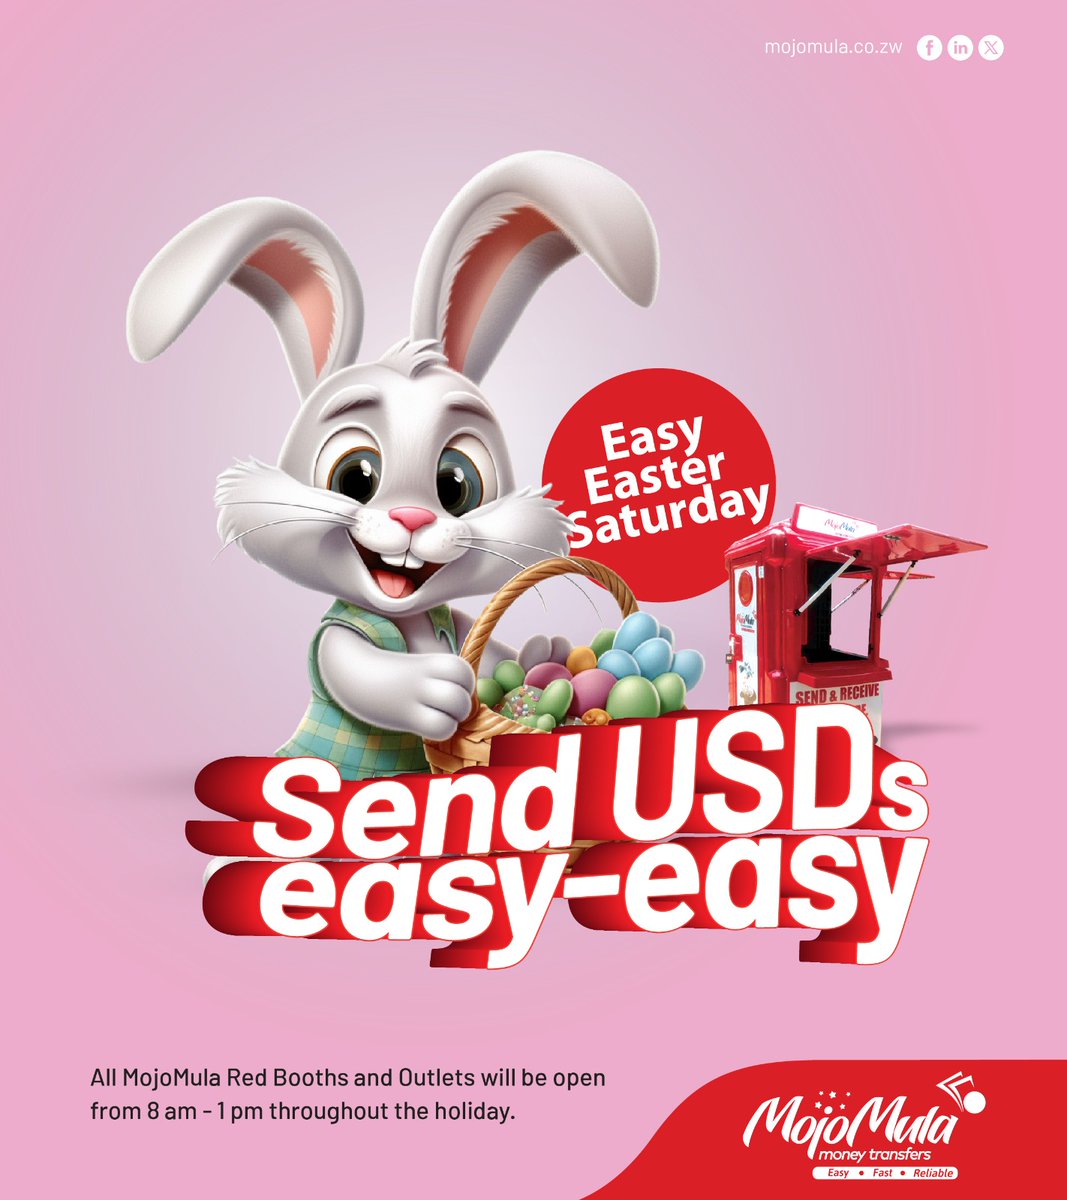 Send USDs Easy Easy...

Send USDs to your loved ones this Easter with MojoMula. All MojoMula red booths and outlets will be open from 8am to 1pm throughout the Easter holiday. Happy Easter Saturday!
#mojomula #easter